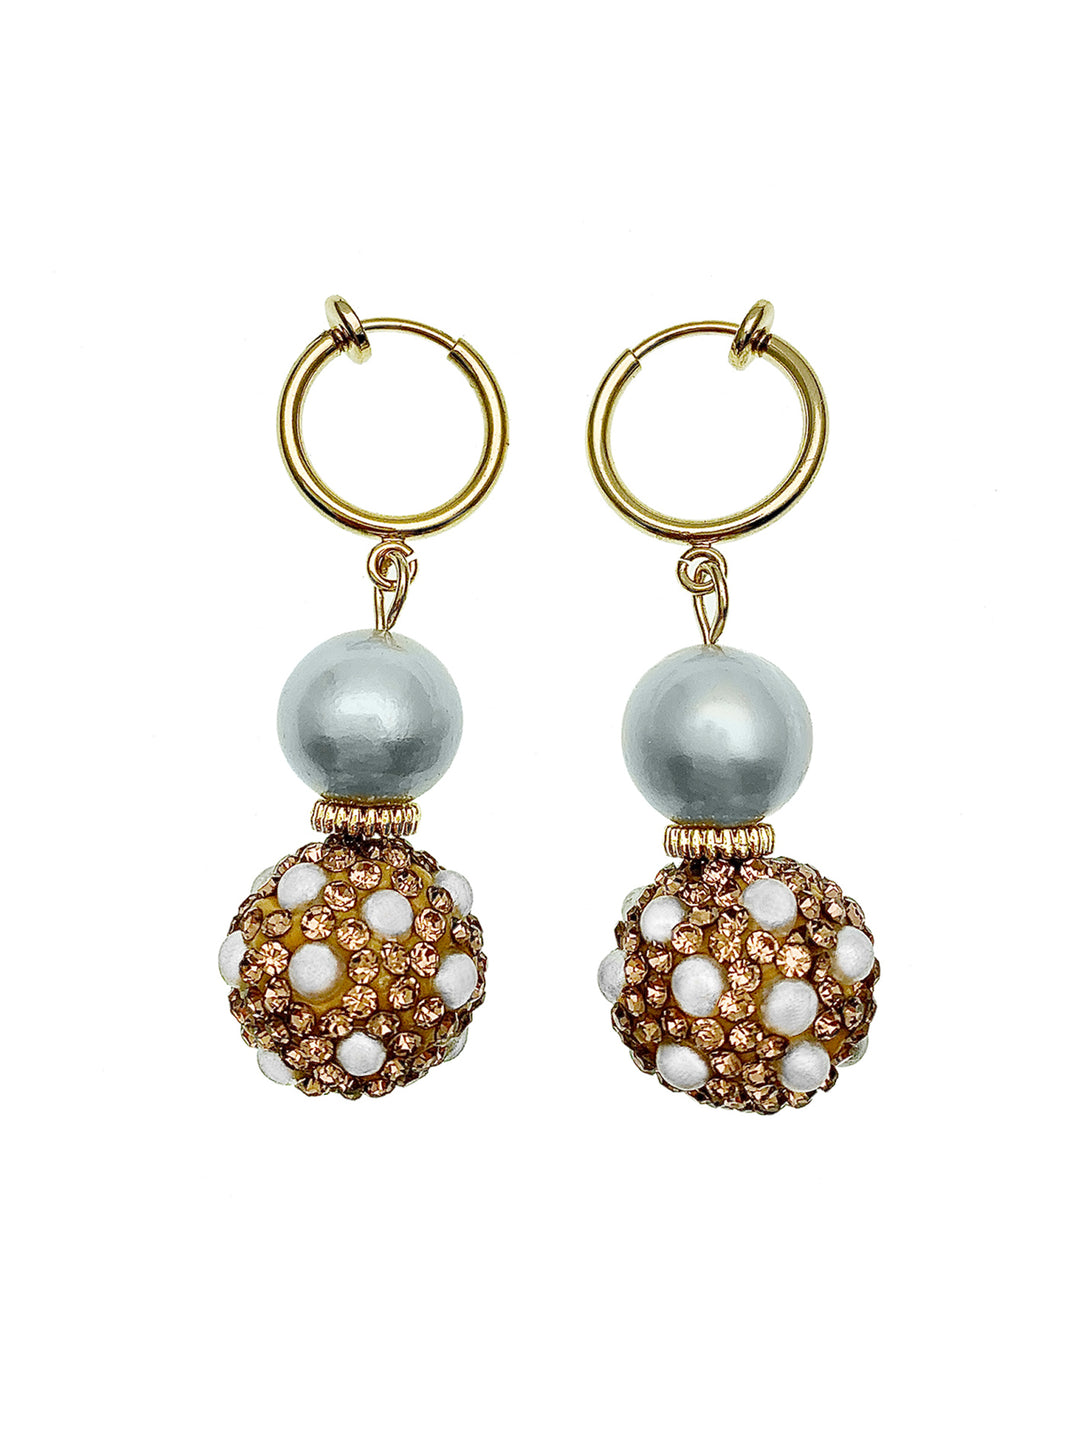 Gray Freshwater Pearls With Rhinestones Bordered Pearls Classic Clip On Earrings FE020 - FARRA